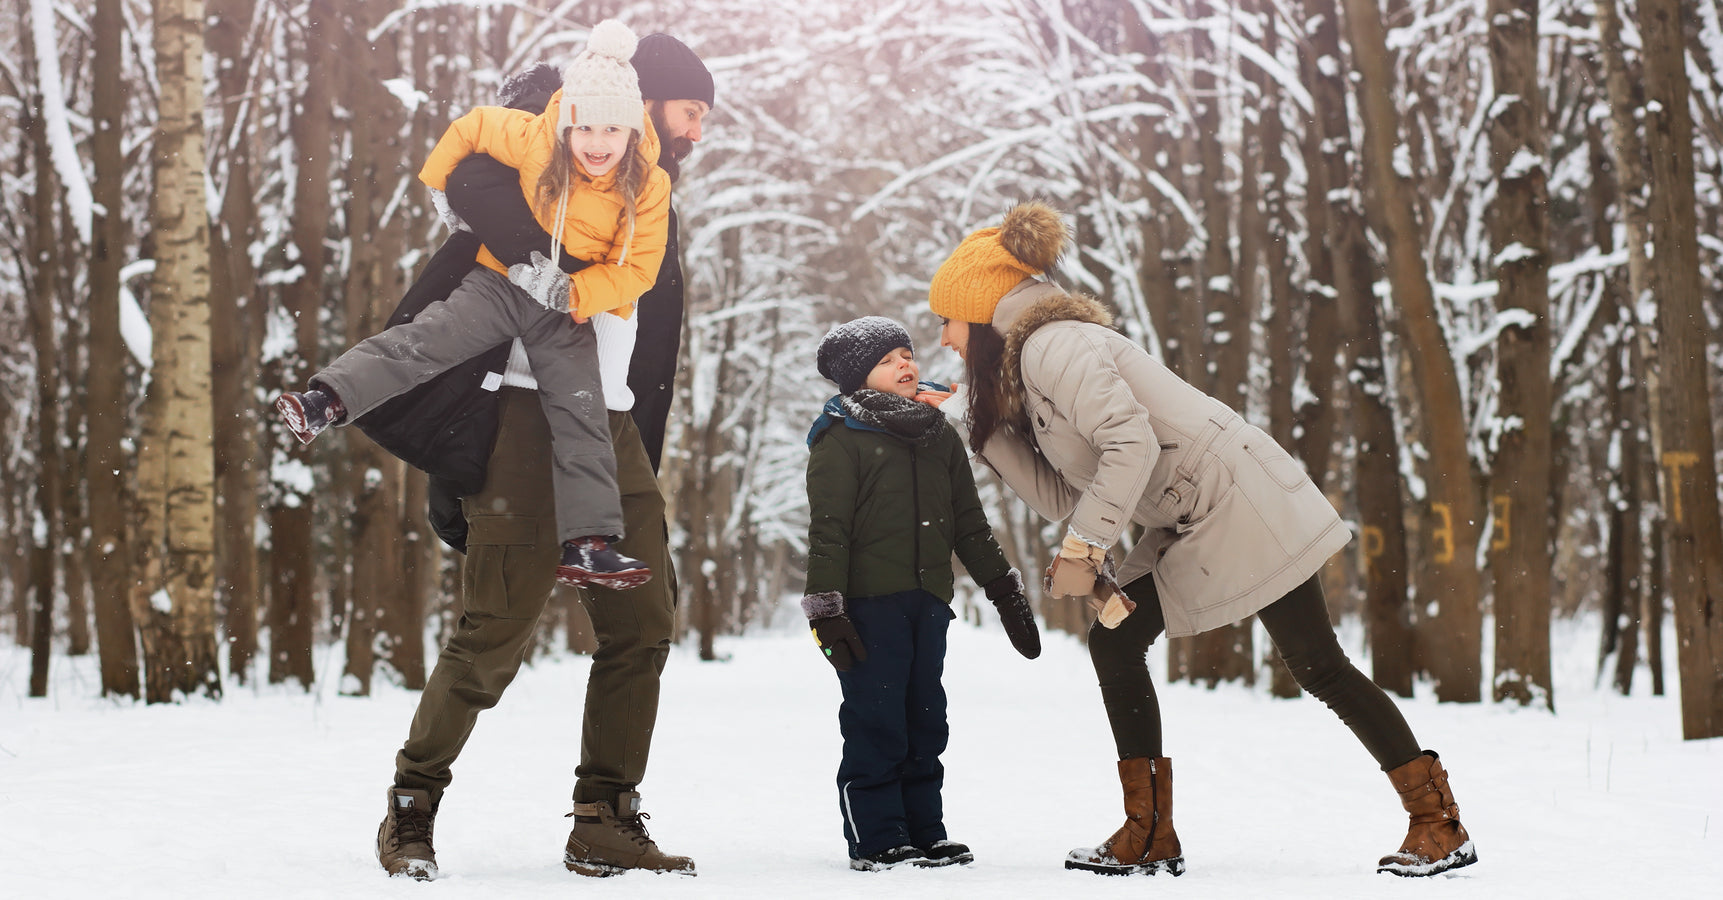 This image shows a happy young family having fun wearing Arcfomor gloves outdoors in the snow